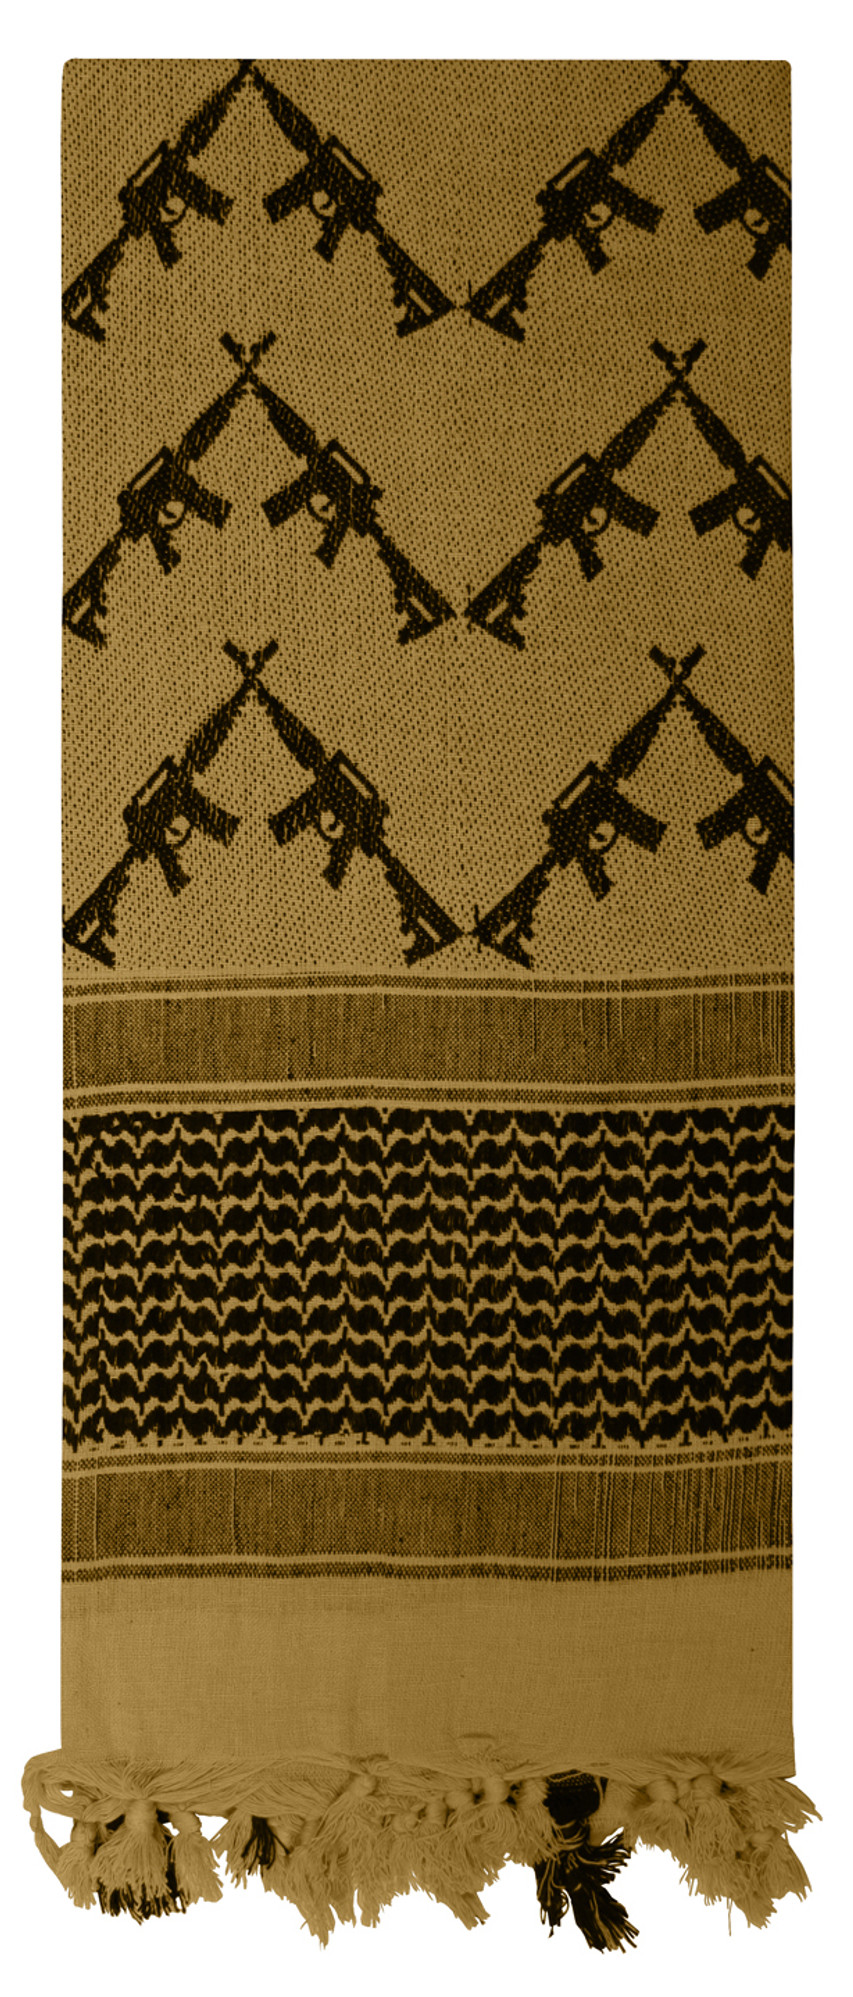 Rothco Crossed Rifles Shemagh Tactical Desert Keffiyeh Scarf - Coyote Brown